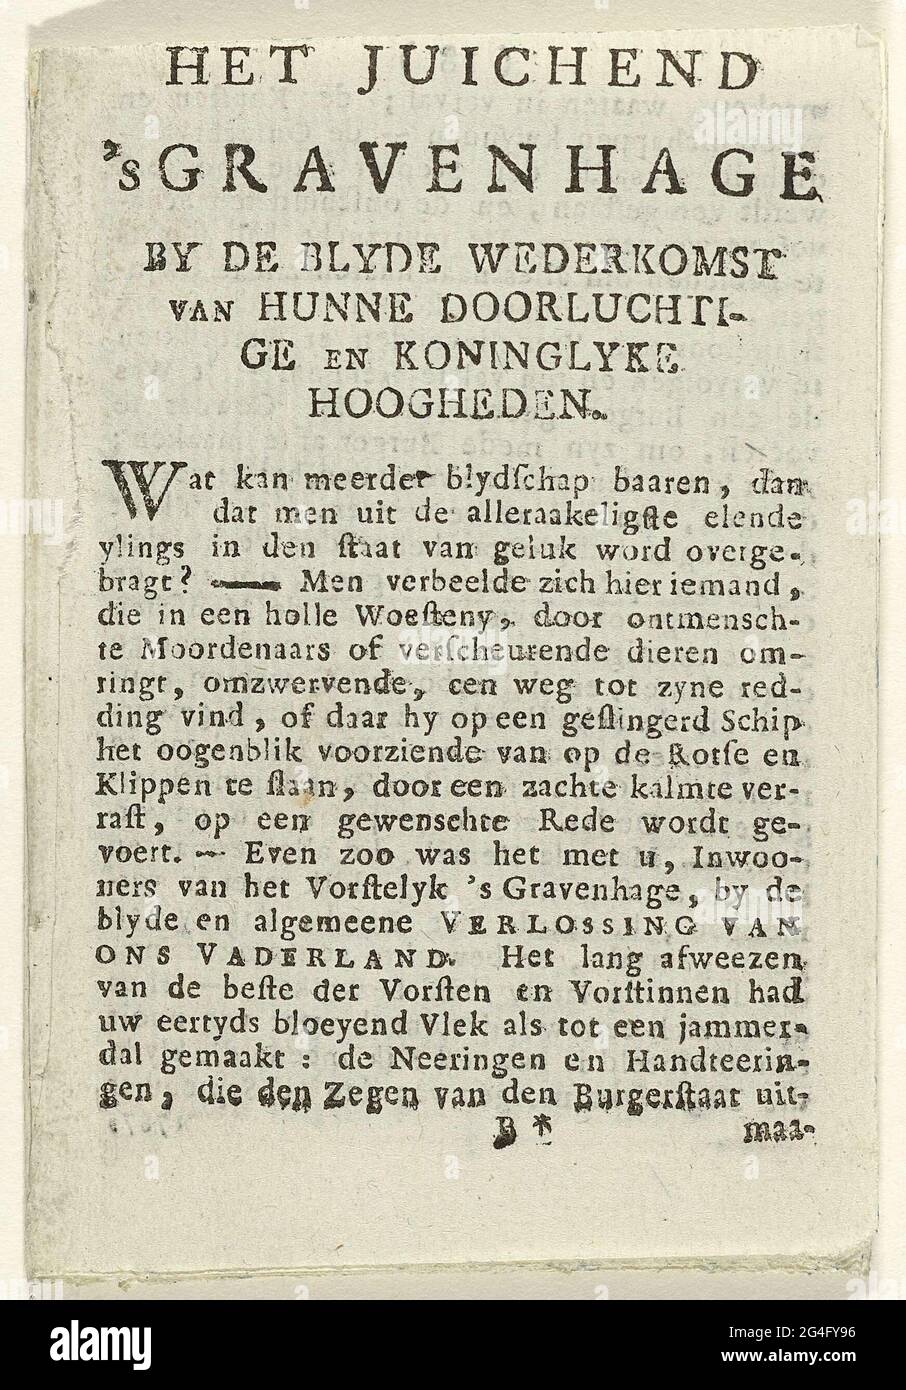 . Description of the Prince and Princess of Orange's Ray by the Burgerij van The Hague, September 1787. Incomplete fragment of an almanac for 1788, the pages numbered 18-24, 33-40, 45-48. Stock Photo